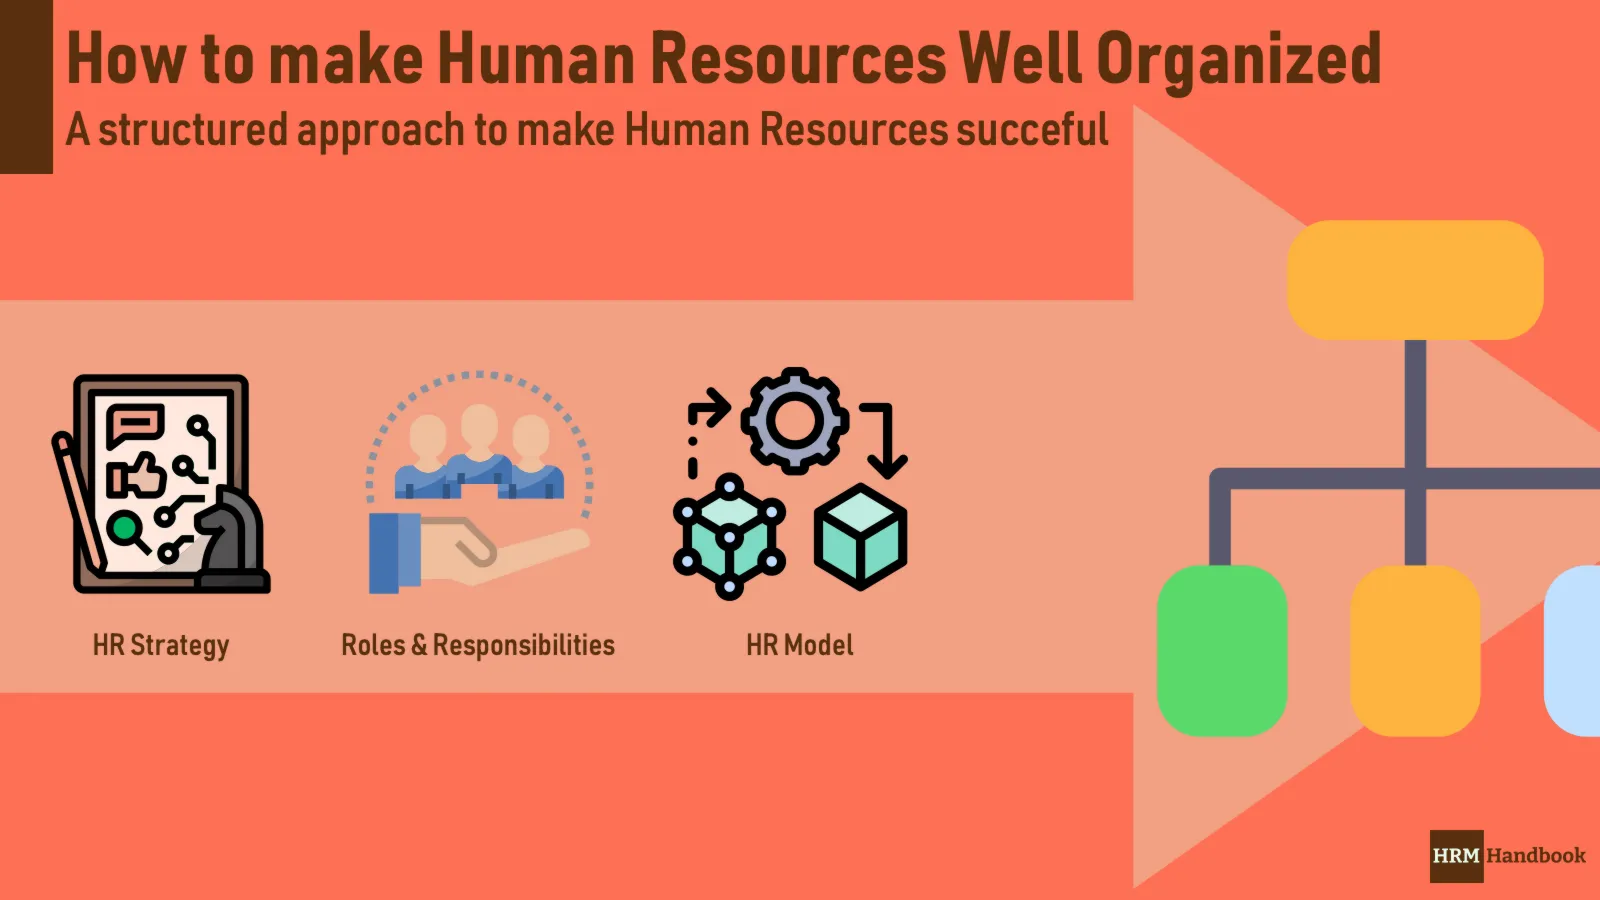 How to make Human Resources Management Function Streamlined and Well Organized